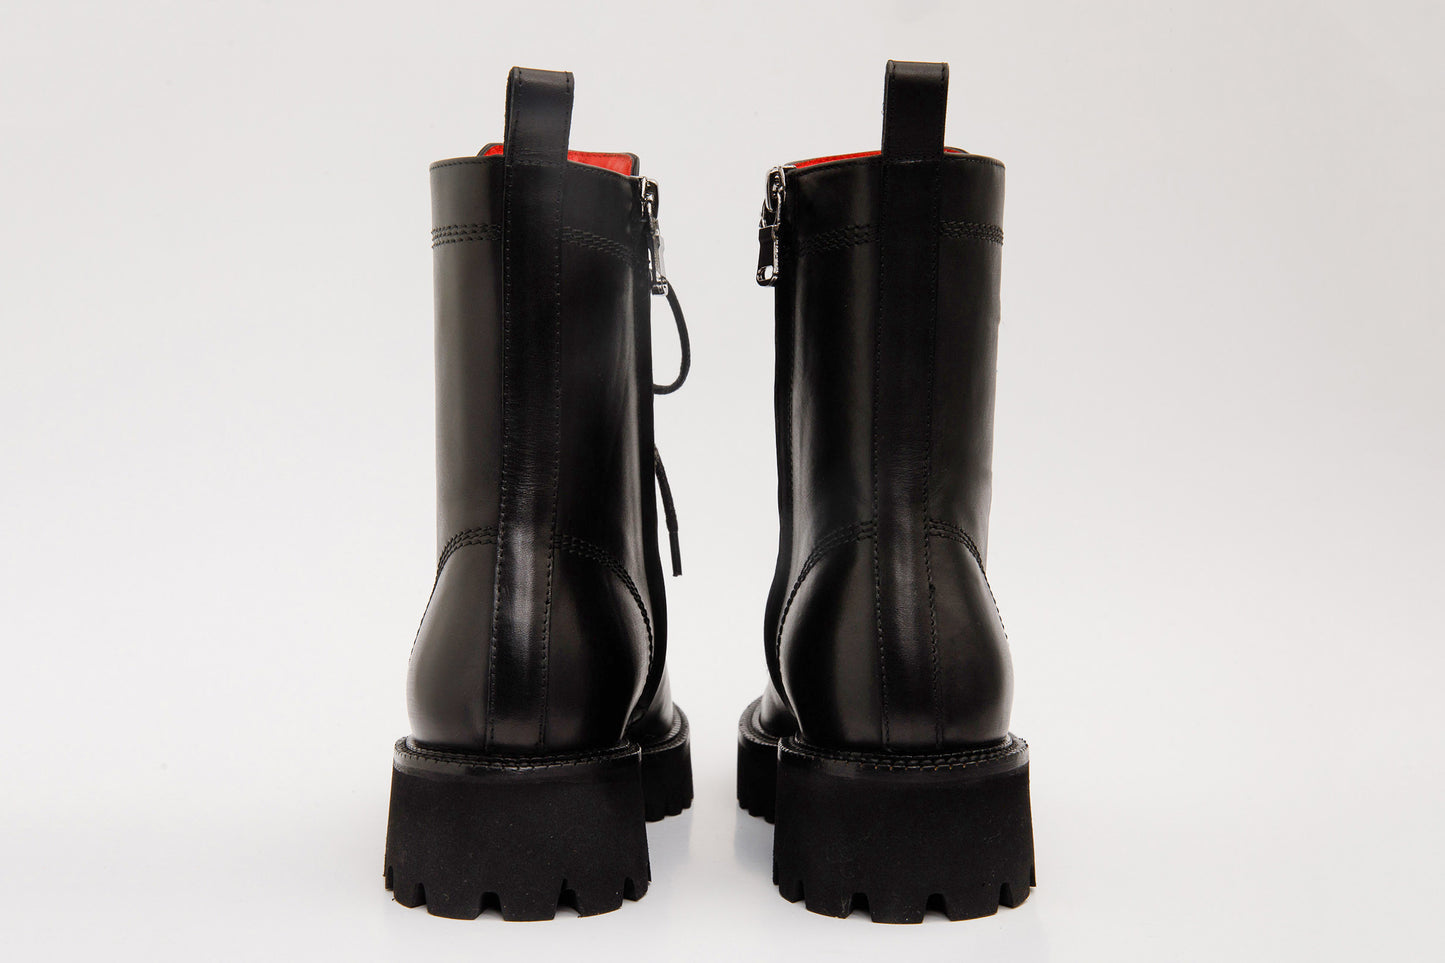 The Moreno Black Leather Lace-Up Mid Calf Women Boot